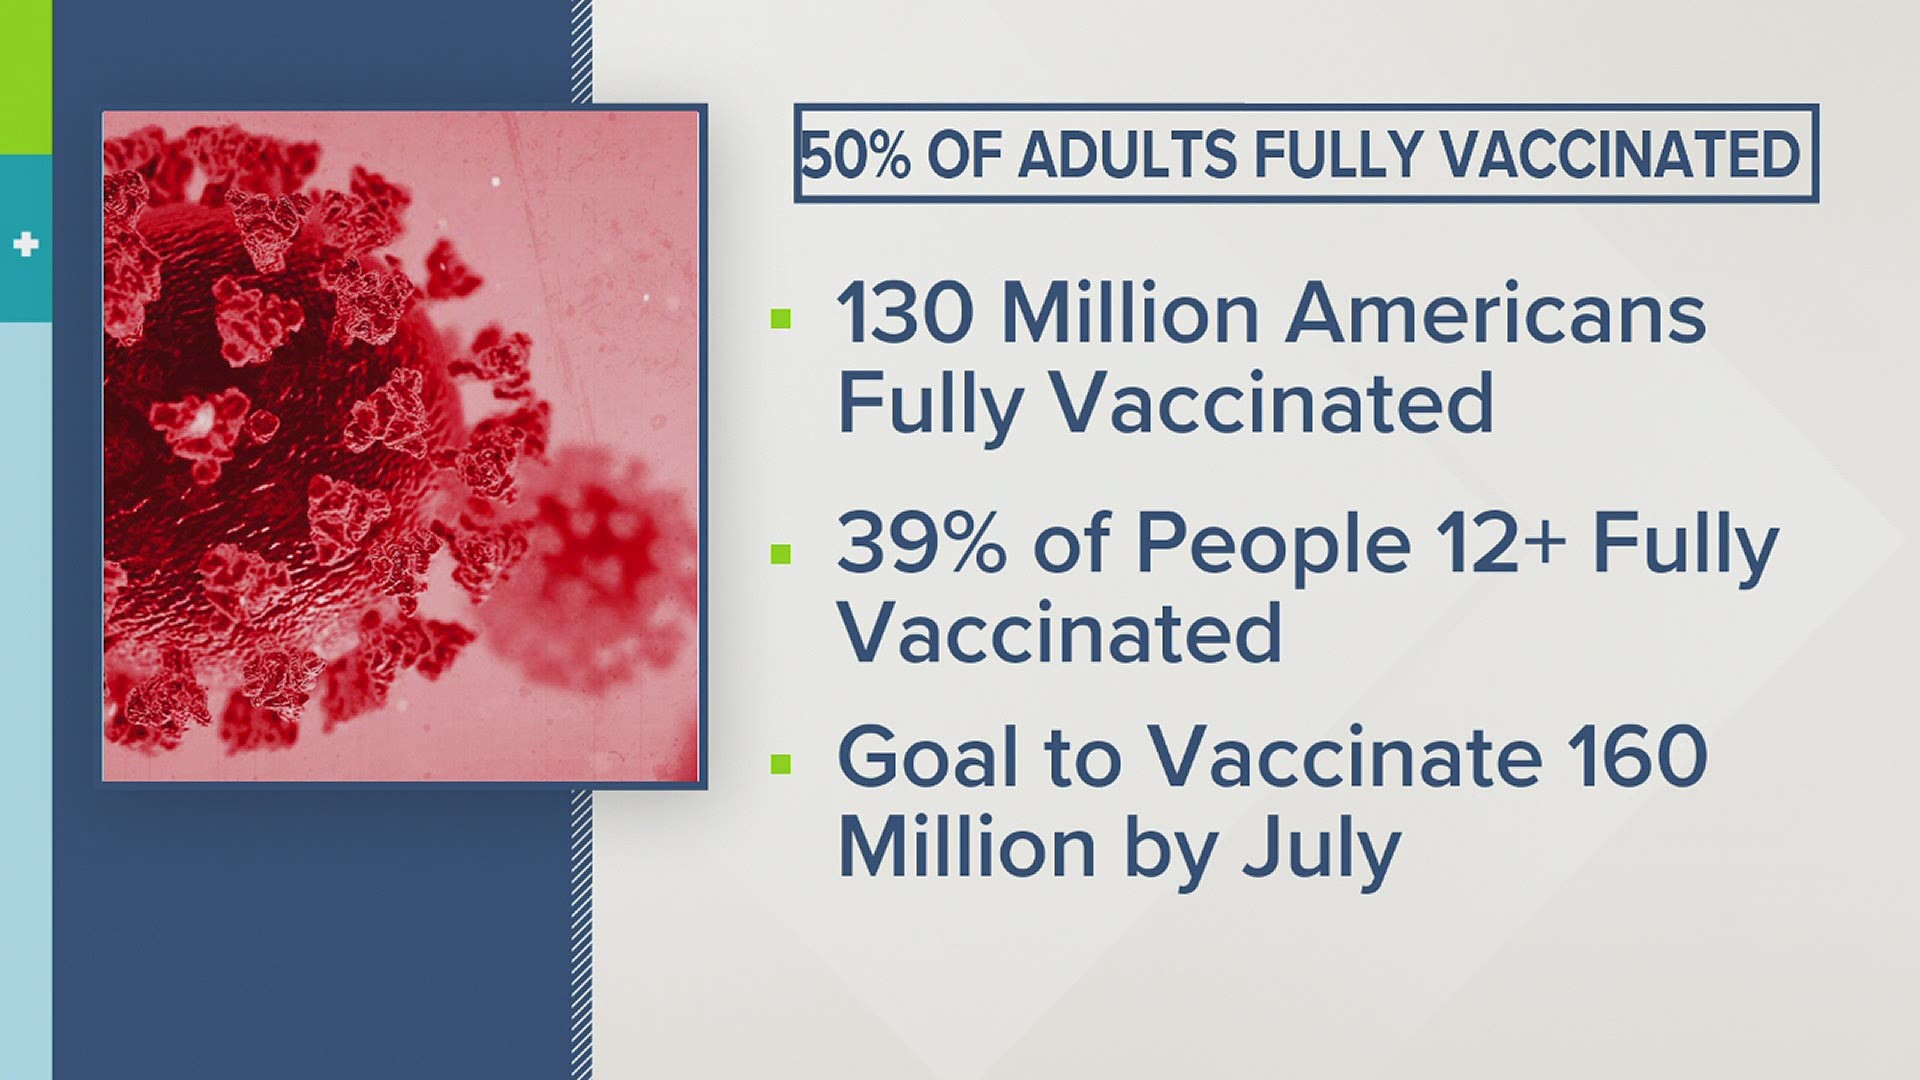 The goal is to vaccinate 160 million people by July.